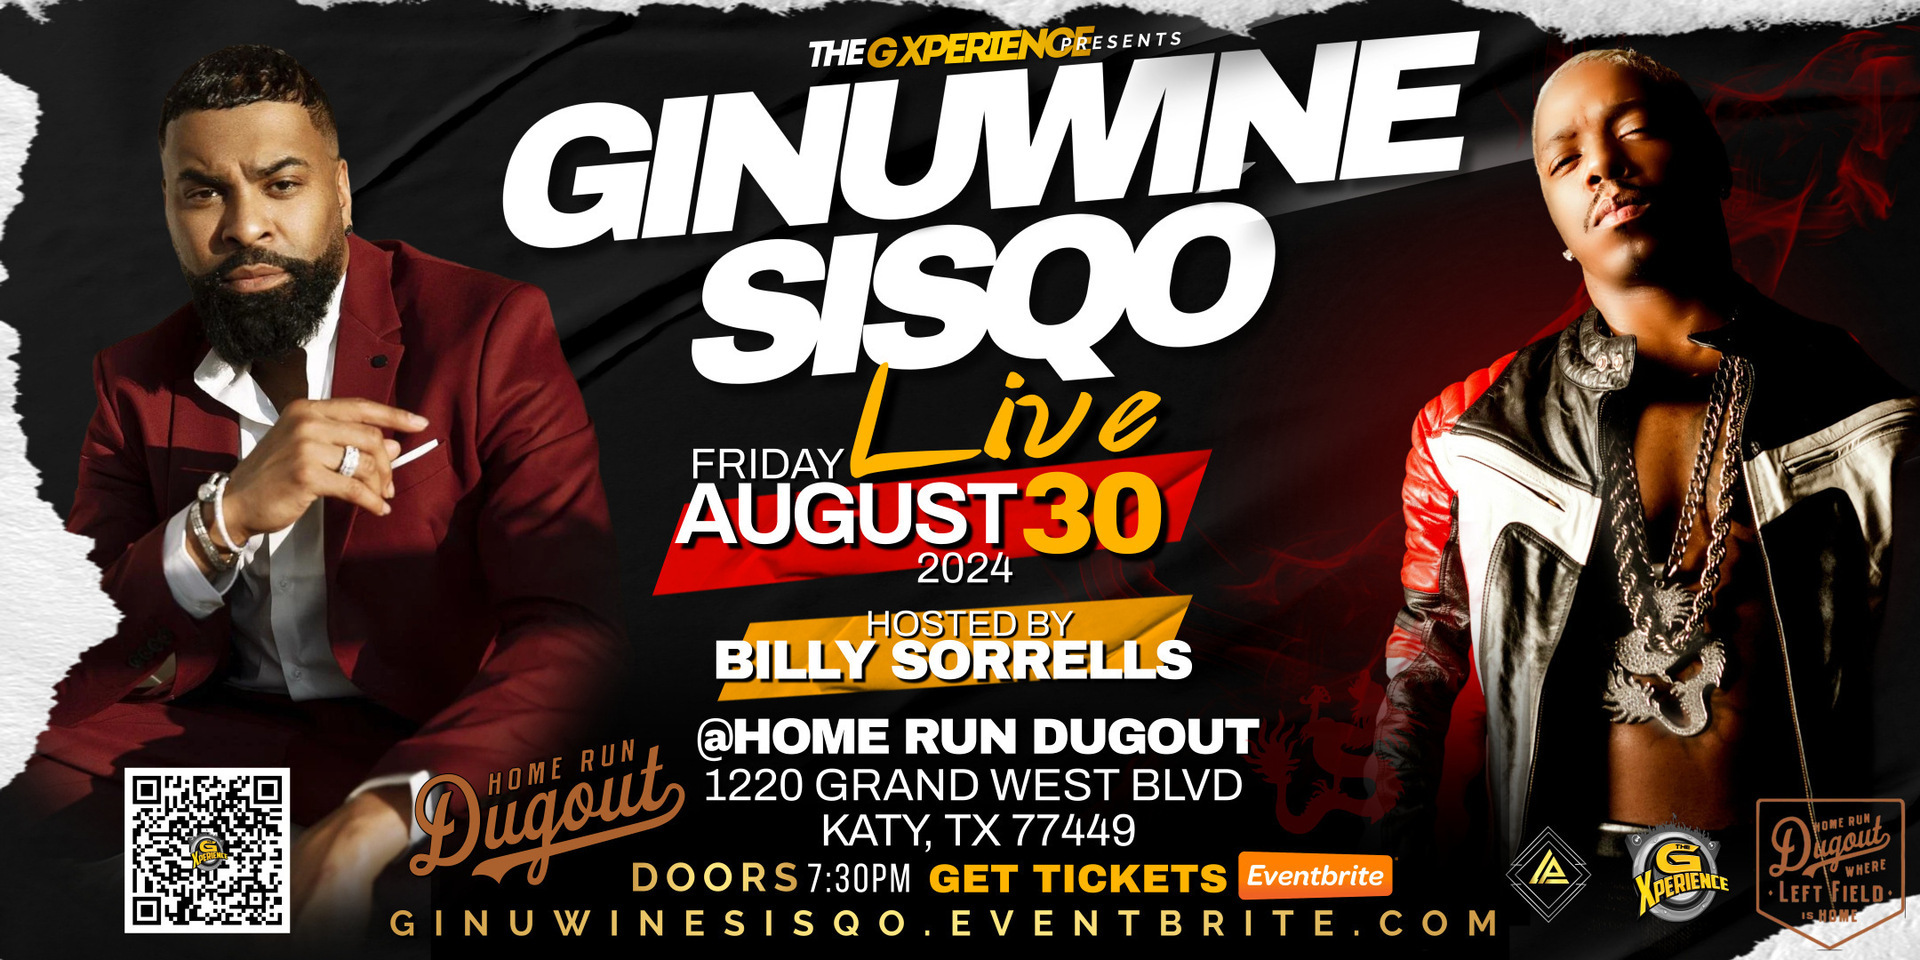 GINUWINE and SISQO performing LIVE - Friday August 30, 2024 - KATY, TEXAS, Katy, Texas, United States